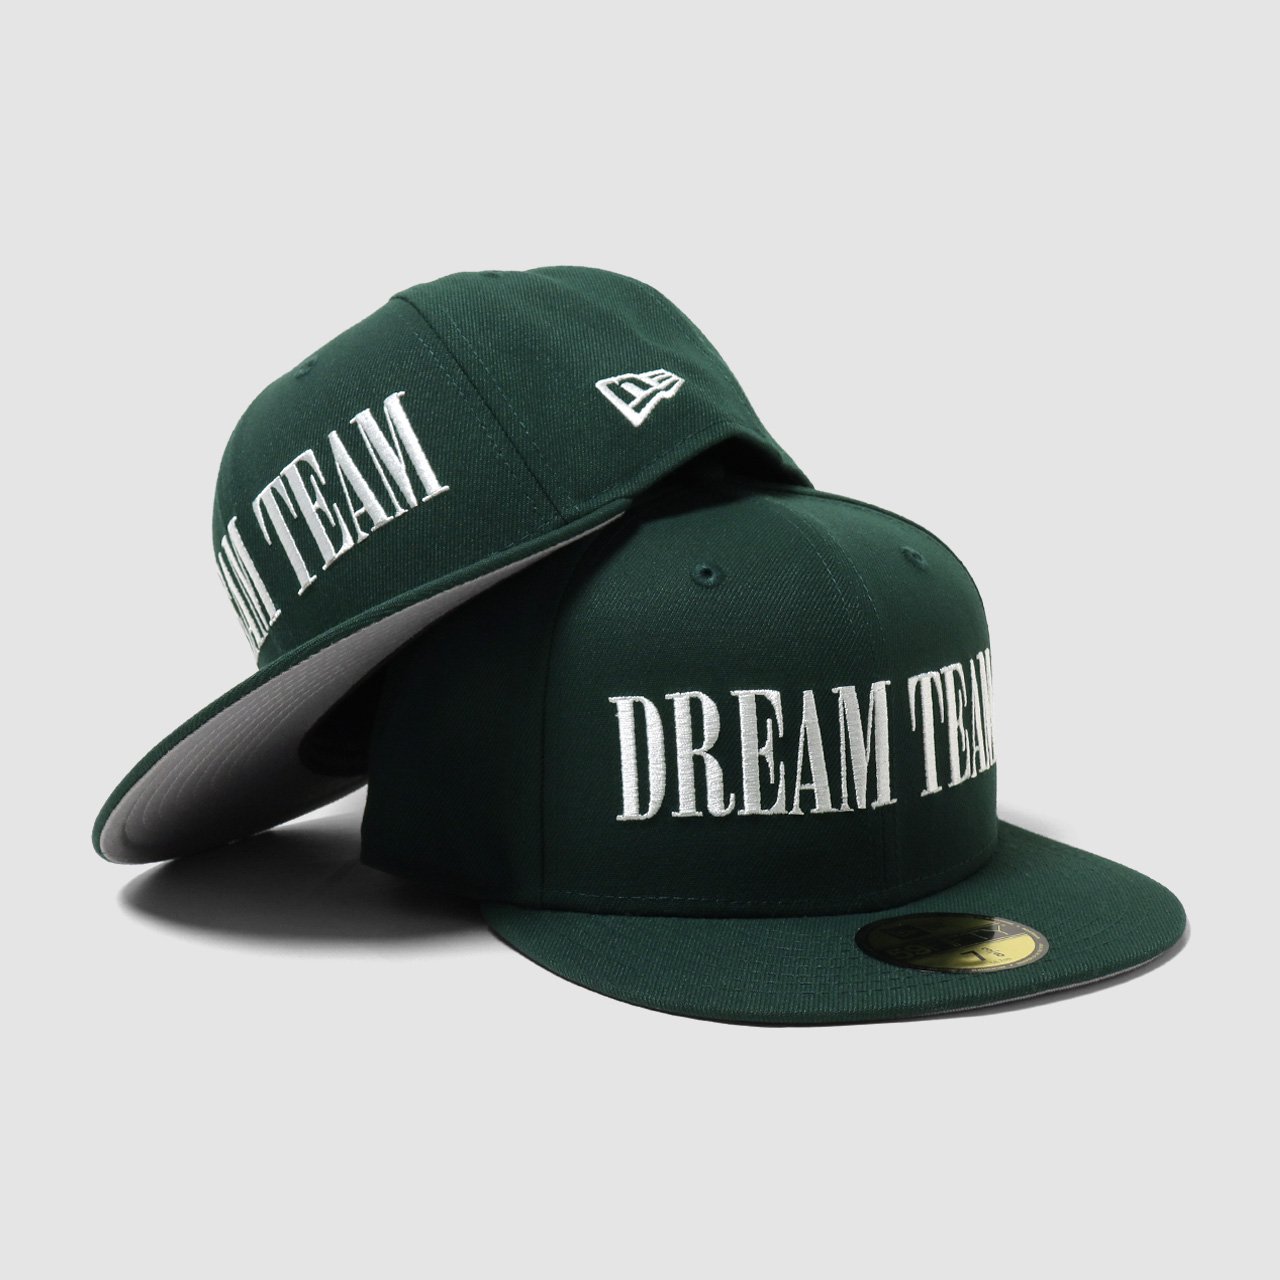 <img class='new_mark_img1' src='https://img.shop-pro.jp/img/new/icons20.gif' style='border:none;display:inline;margin:0px;padding:0px;width:auto;' />Basic DREAMTEAM Logo New Era 59Fifty Fitted Cap Dark Green